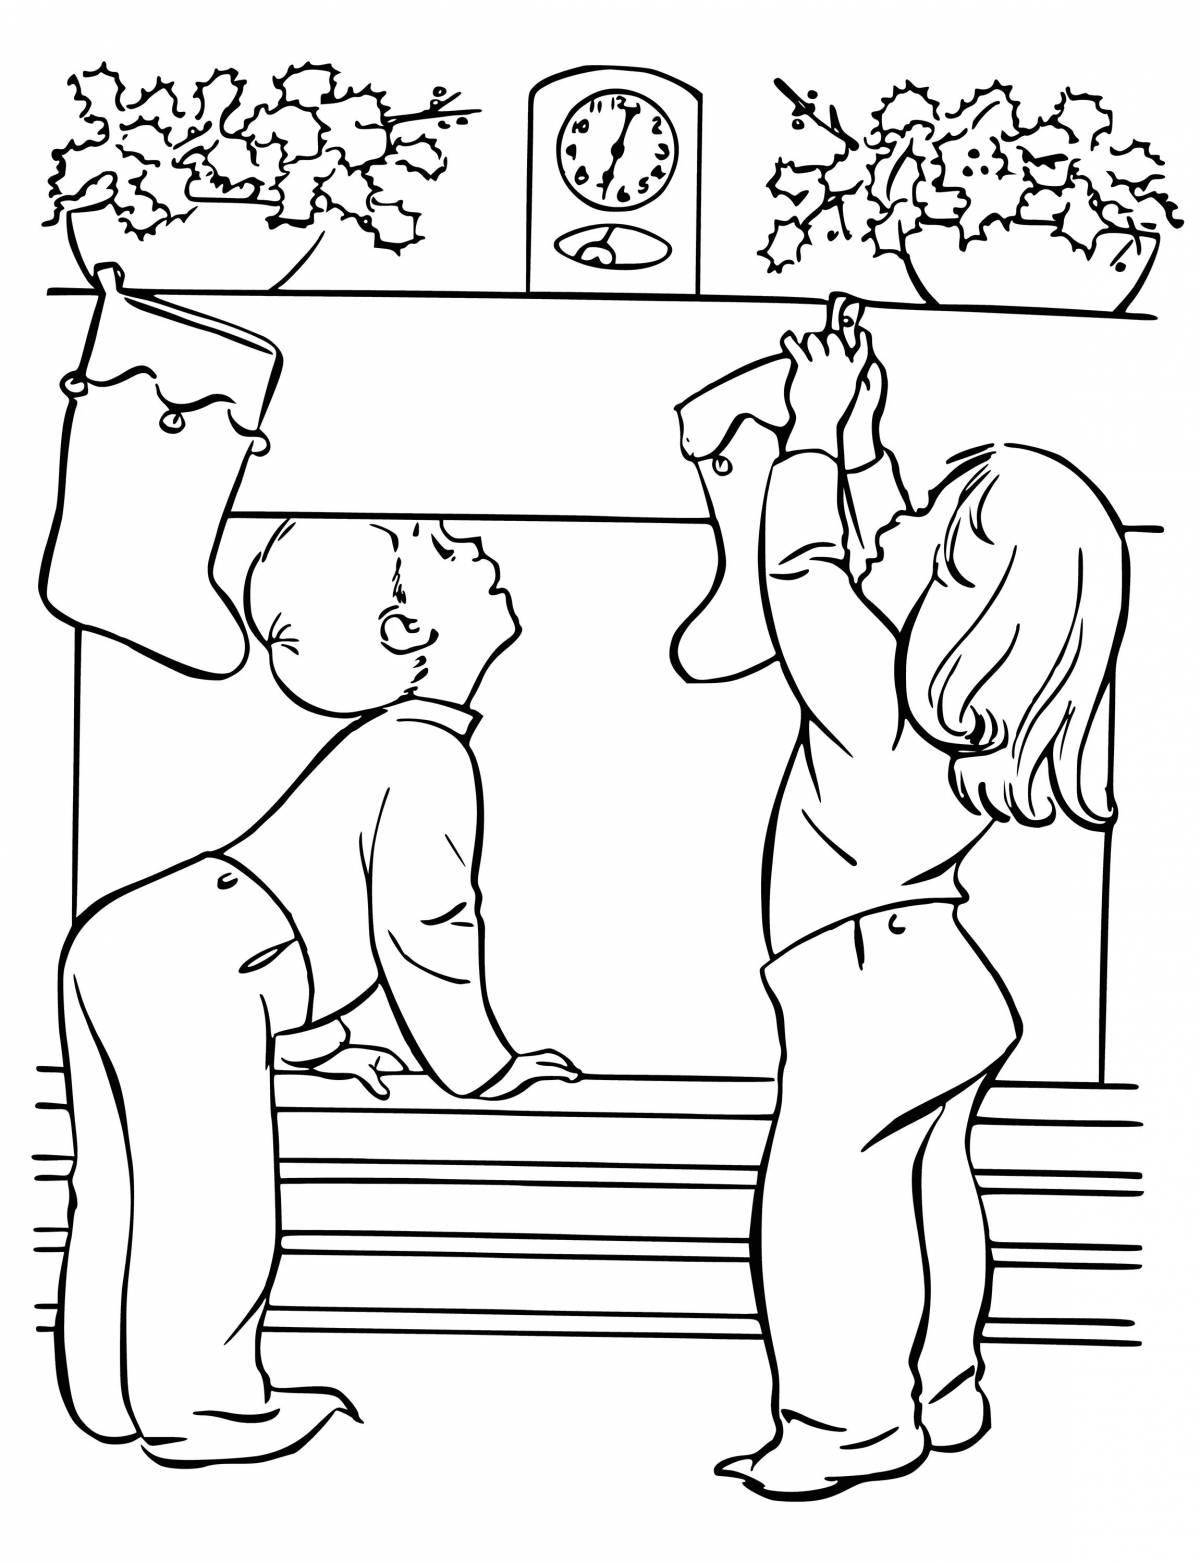 Aababy coloring book